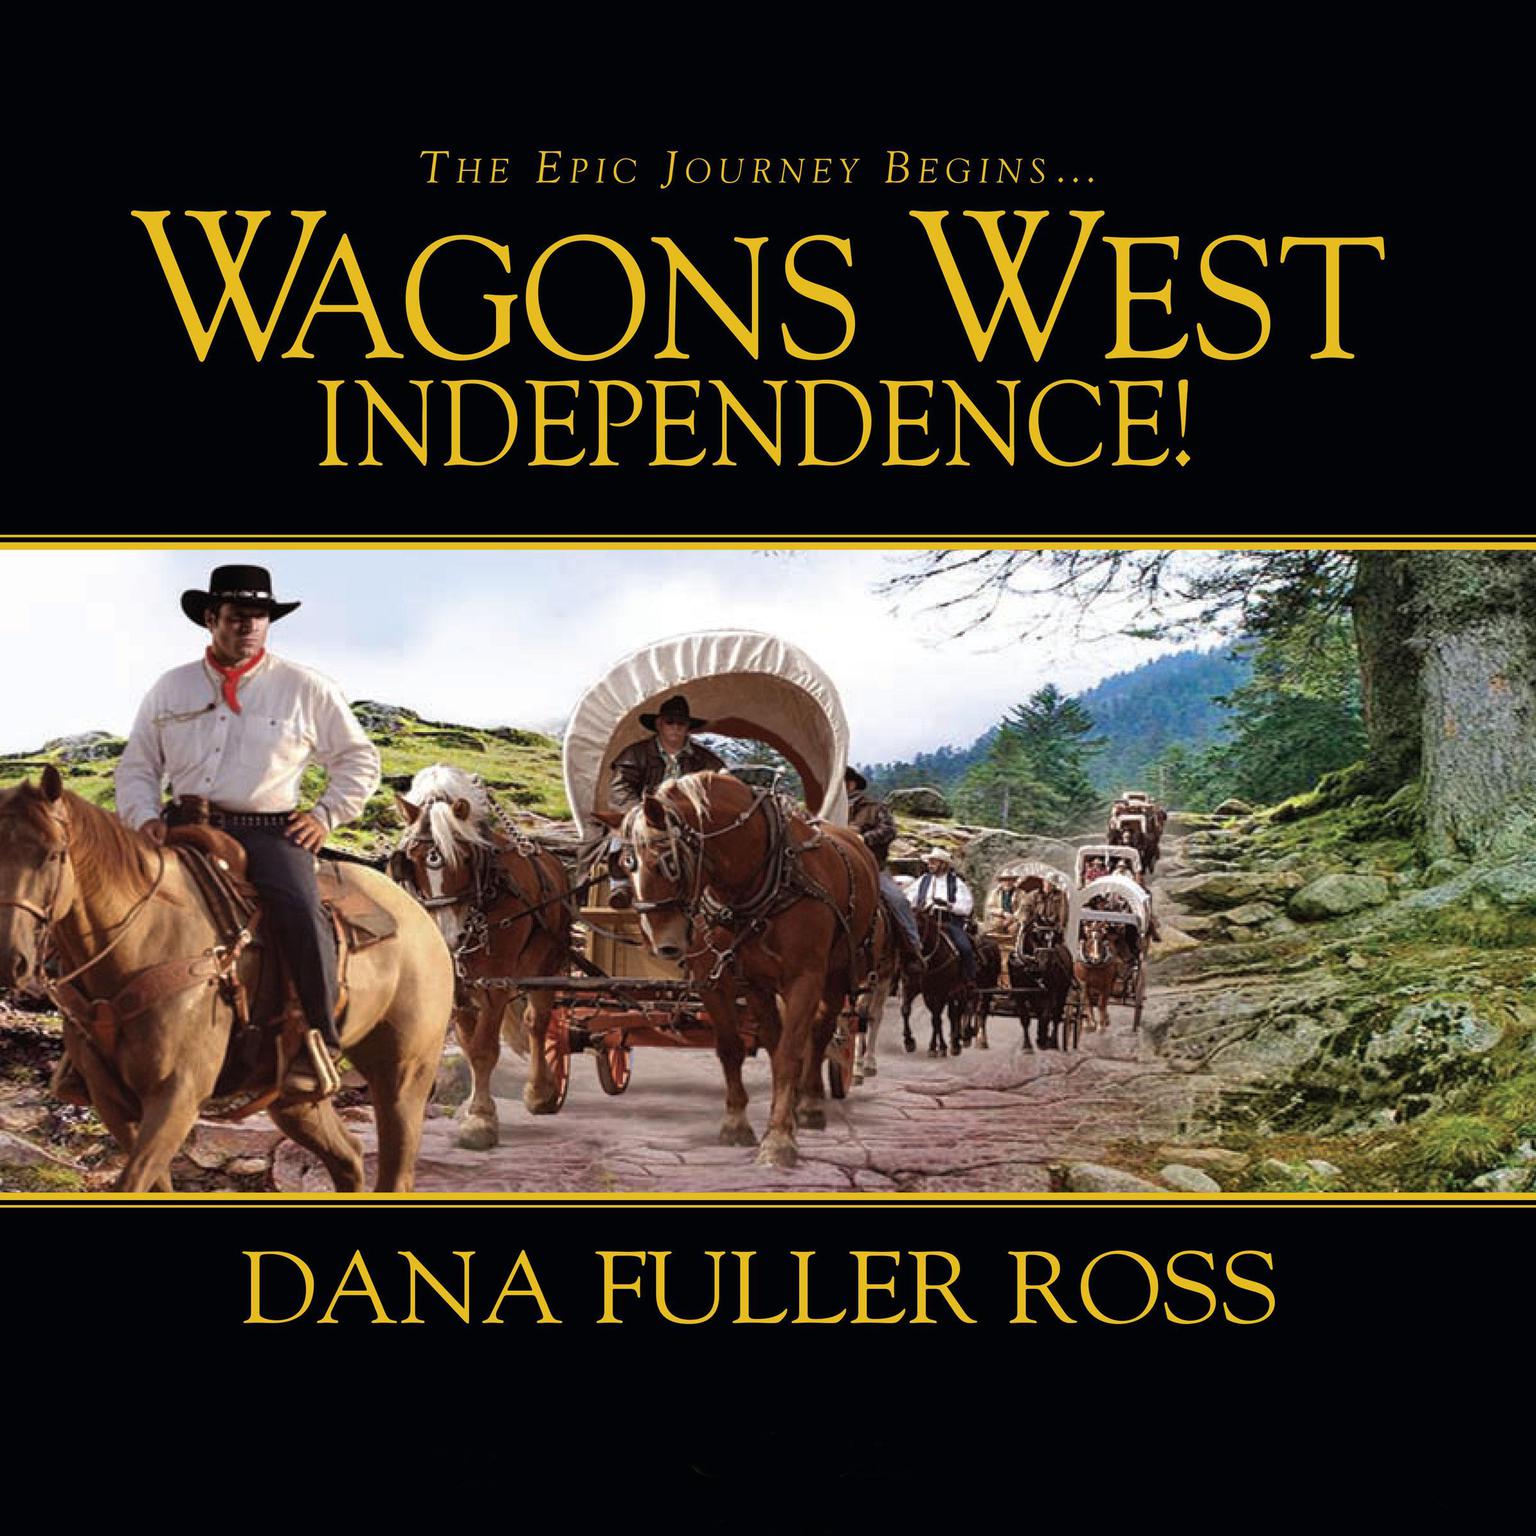 Wagons West Independence! (Abridged) Audiobook, by Dana Fuller Ross